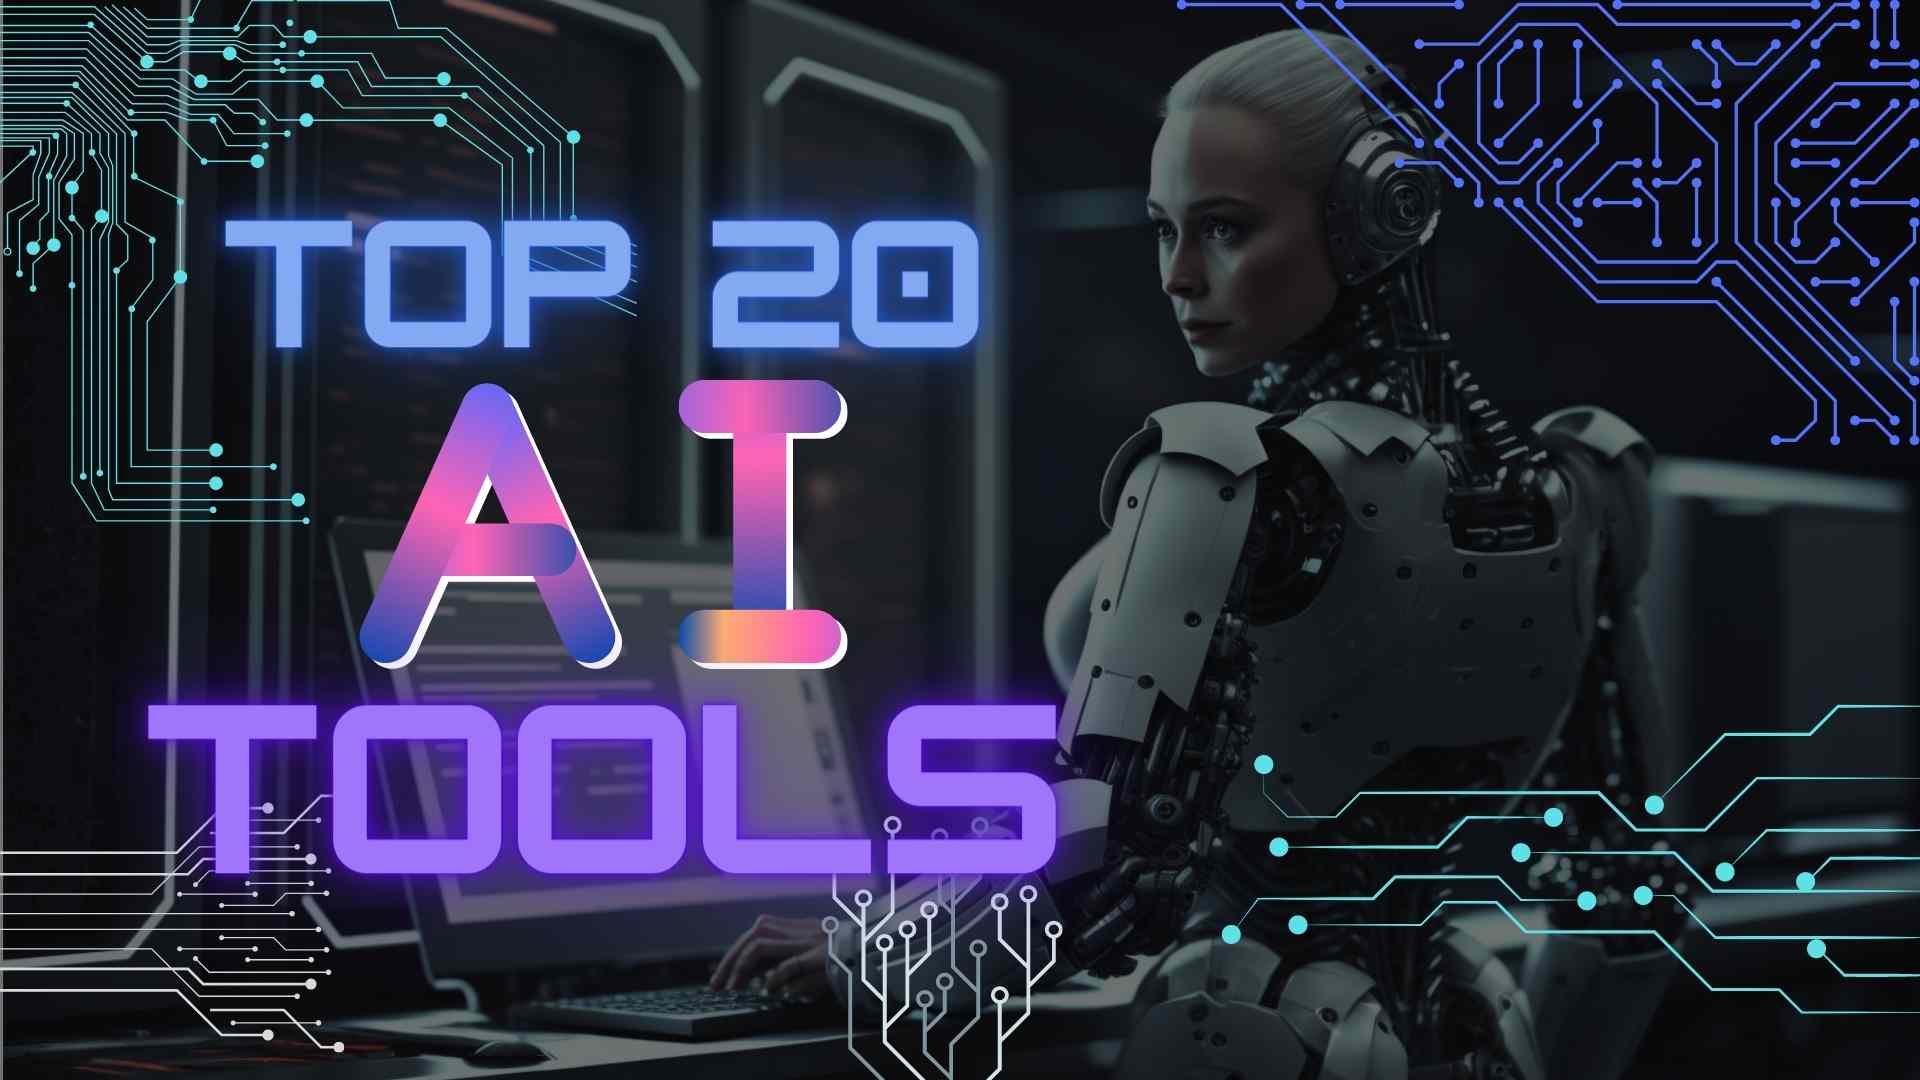 Revolutionize Your Business or Personal Projects with These Top 20 Free AI Tools Available Online!